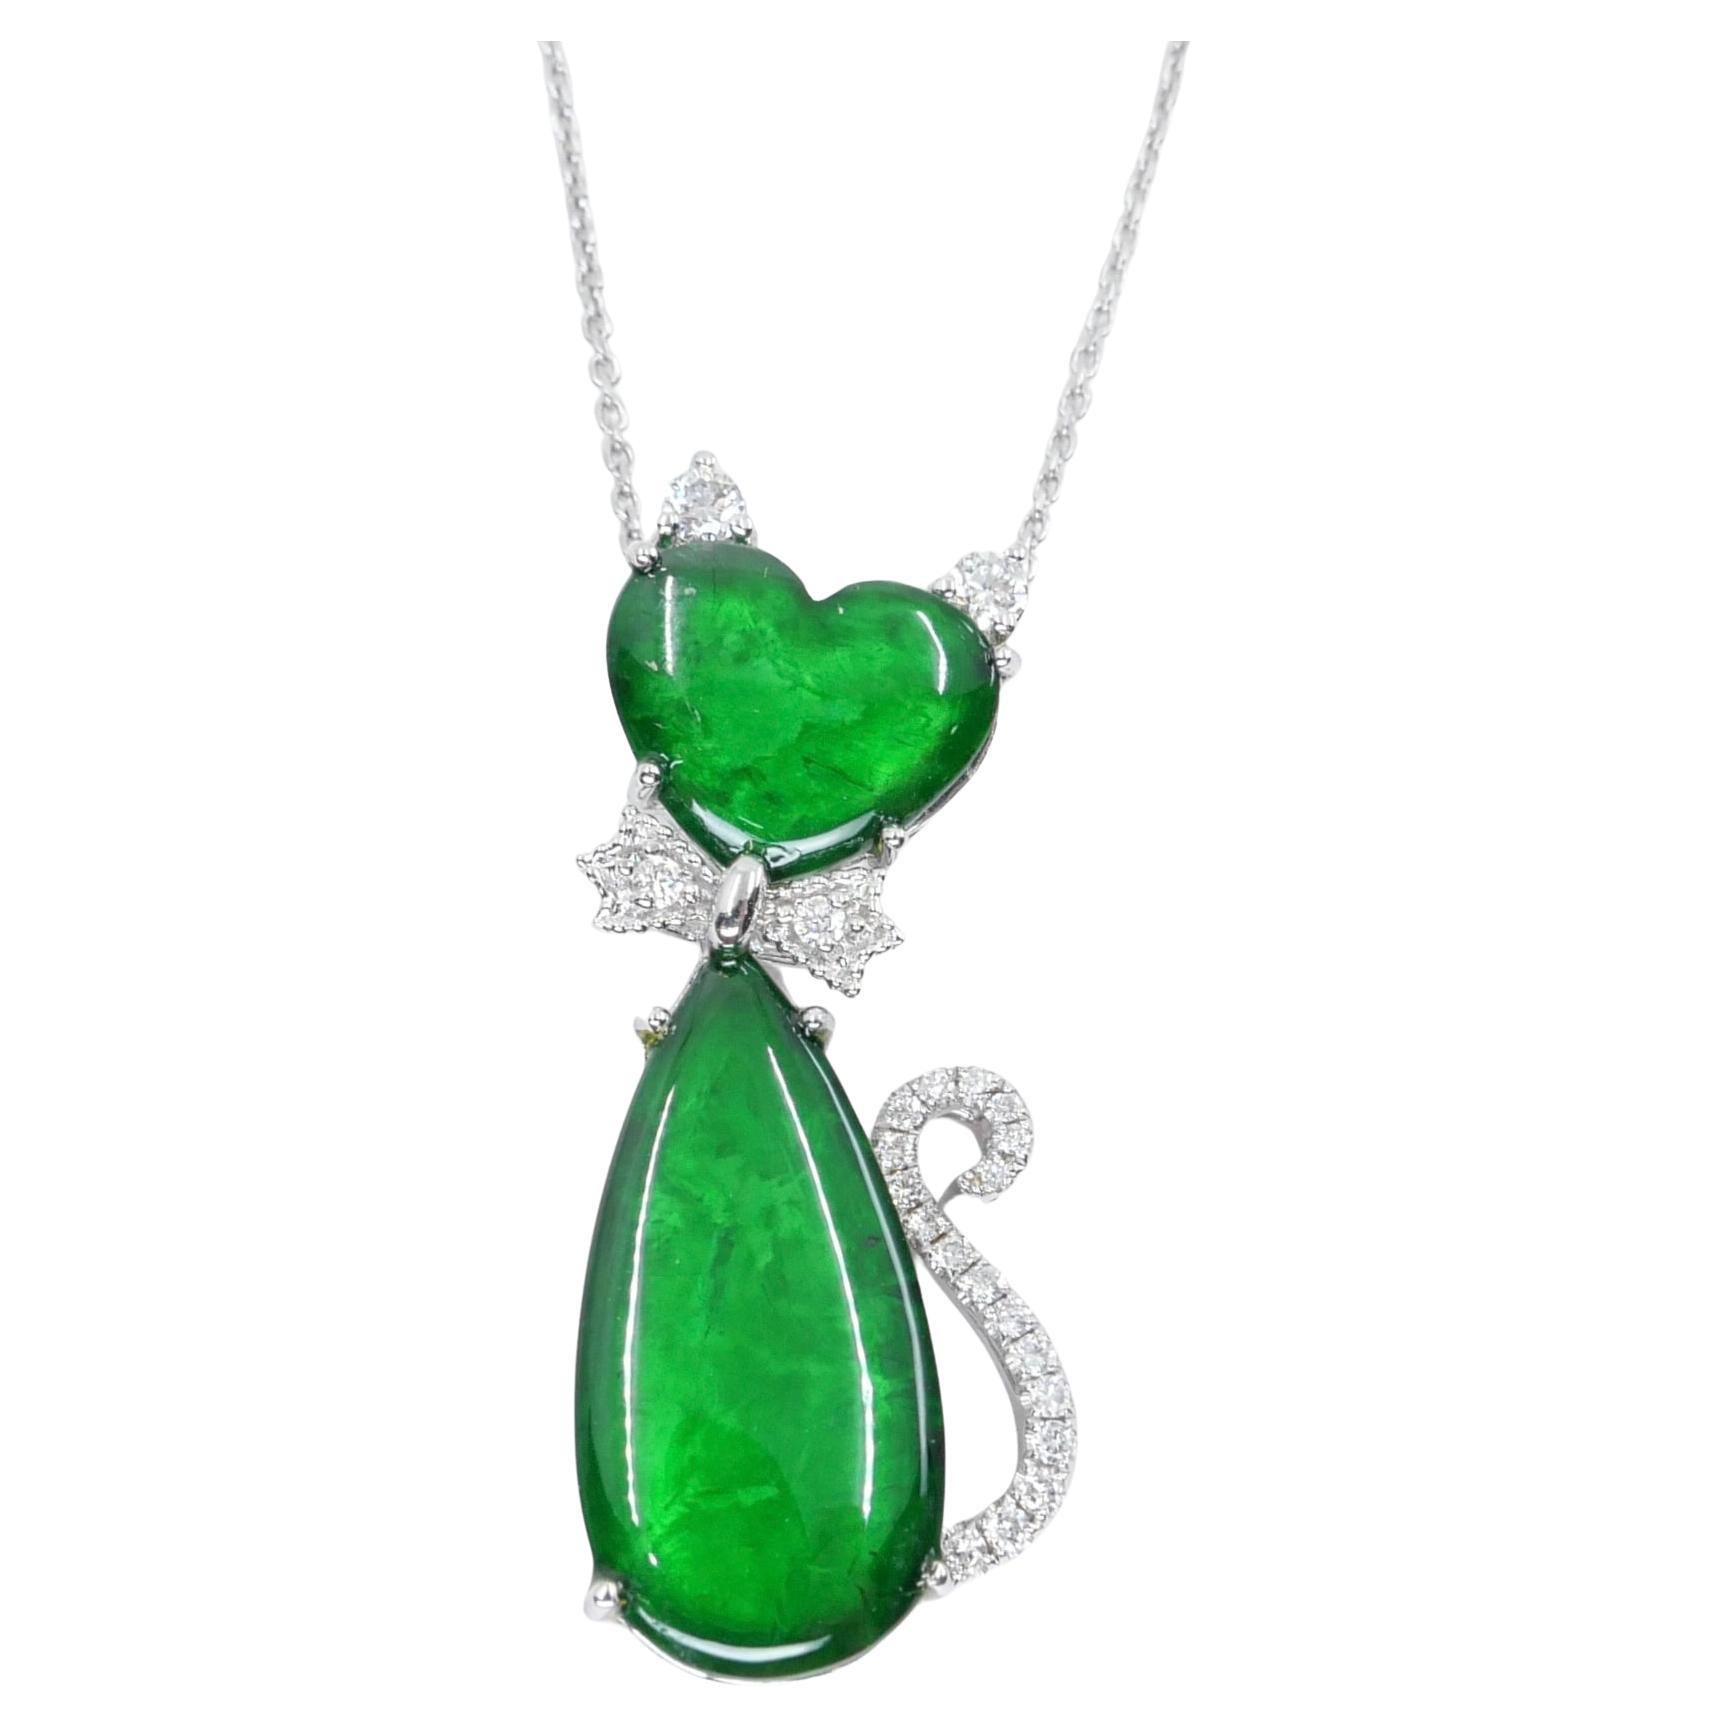 Certified Natural Jade & Diamond Cat Pendant Necklace Glowing Apple Green Color For Sale